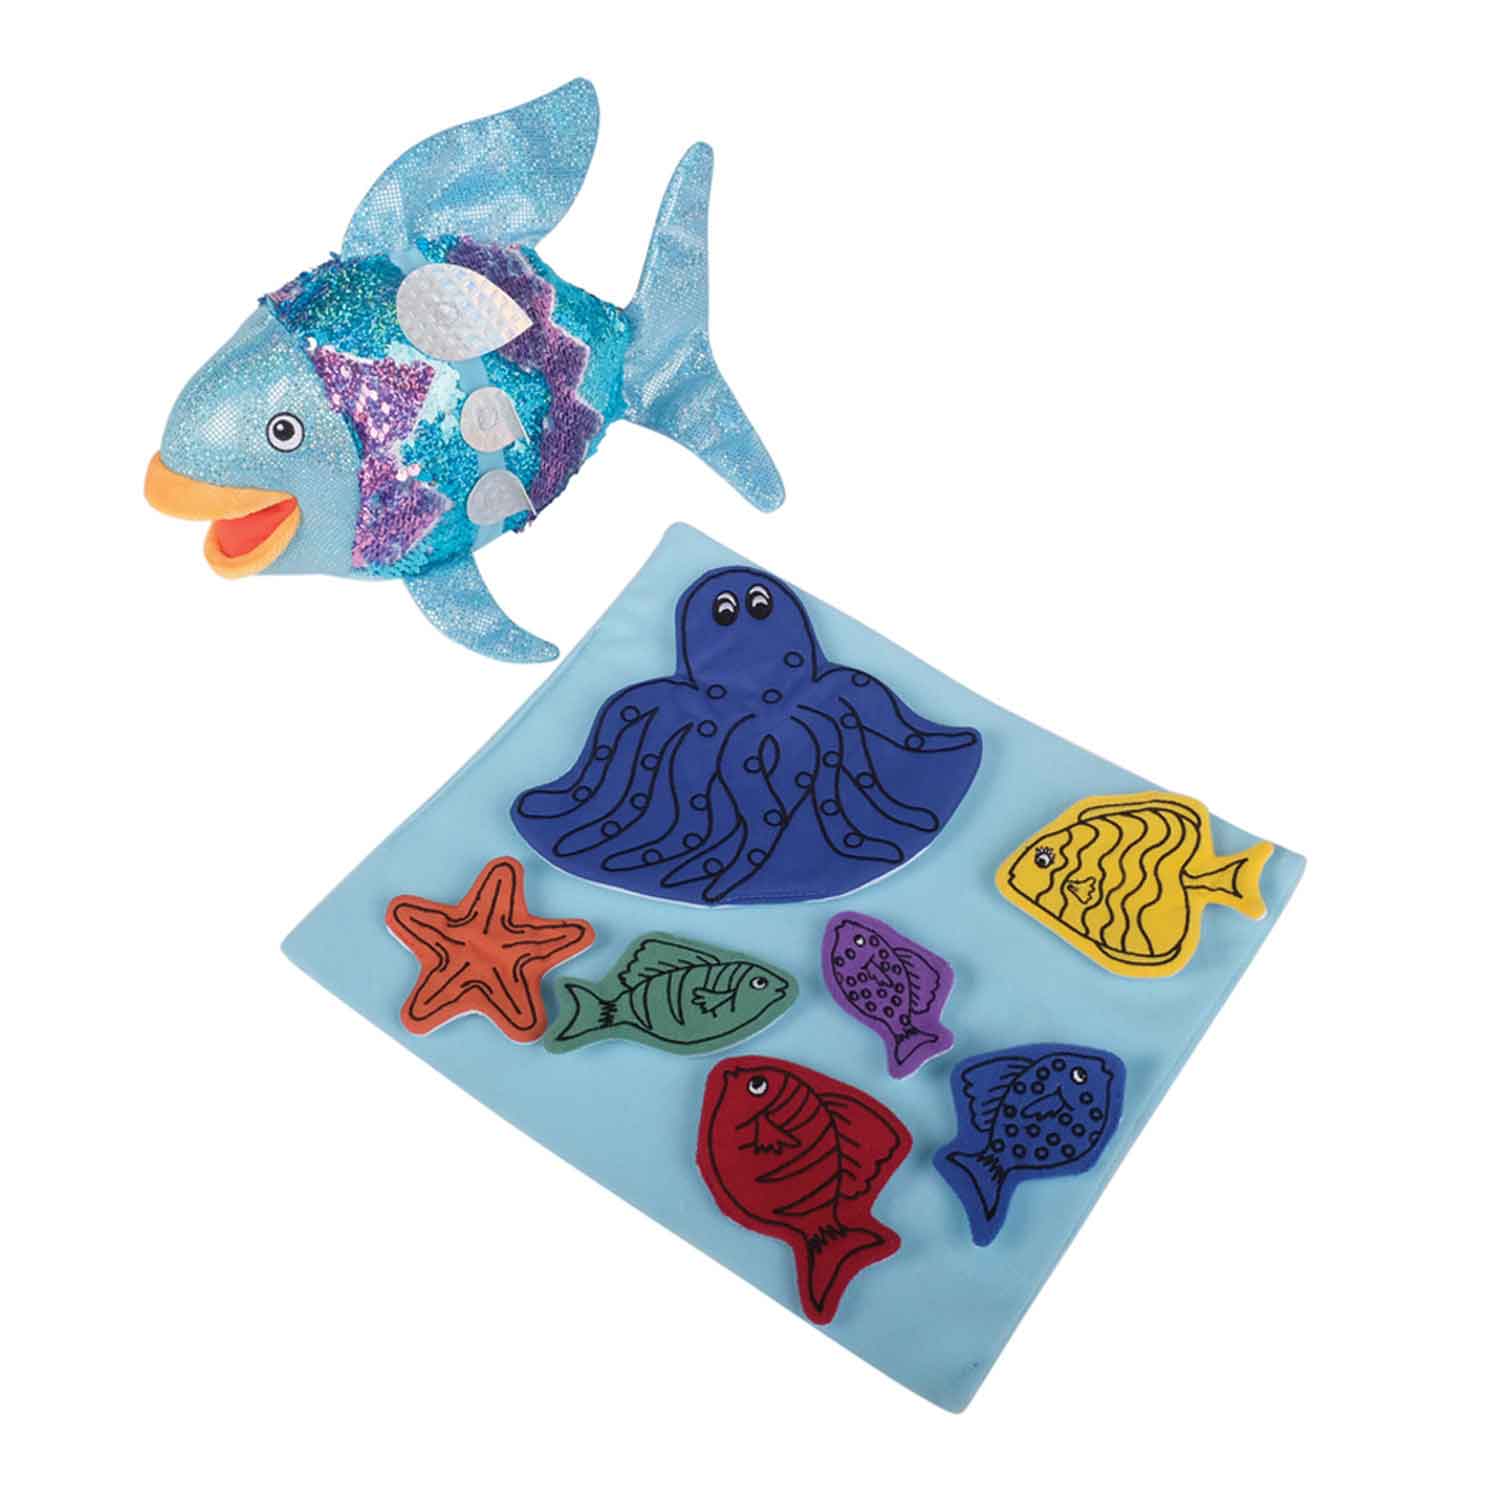 The Rainbow Fish Book and Props